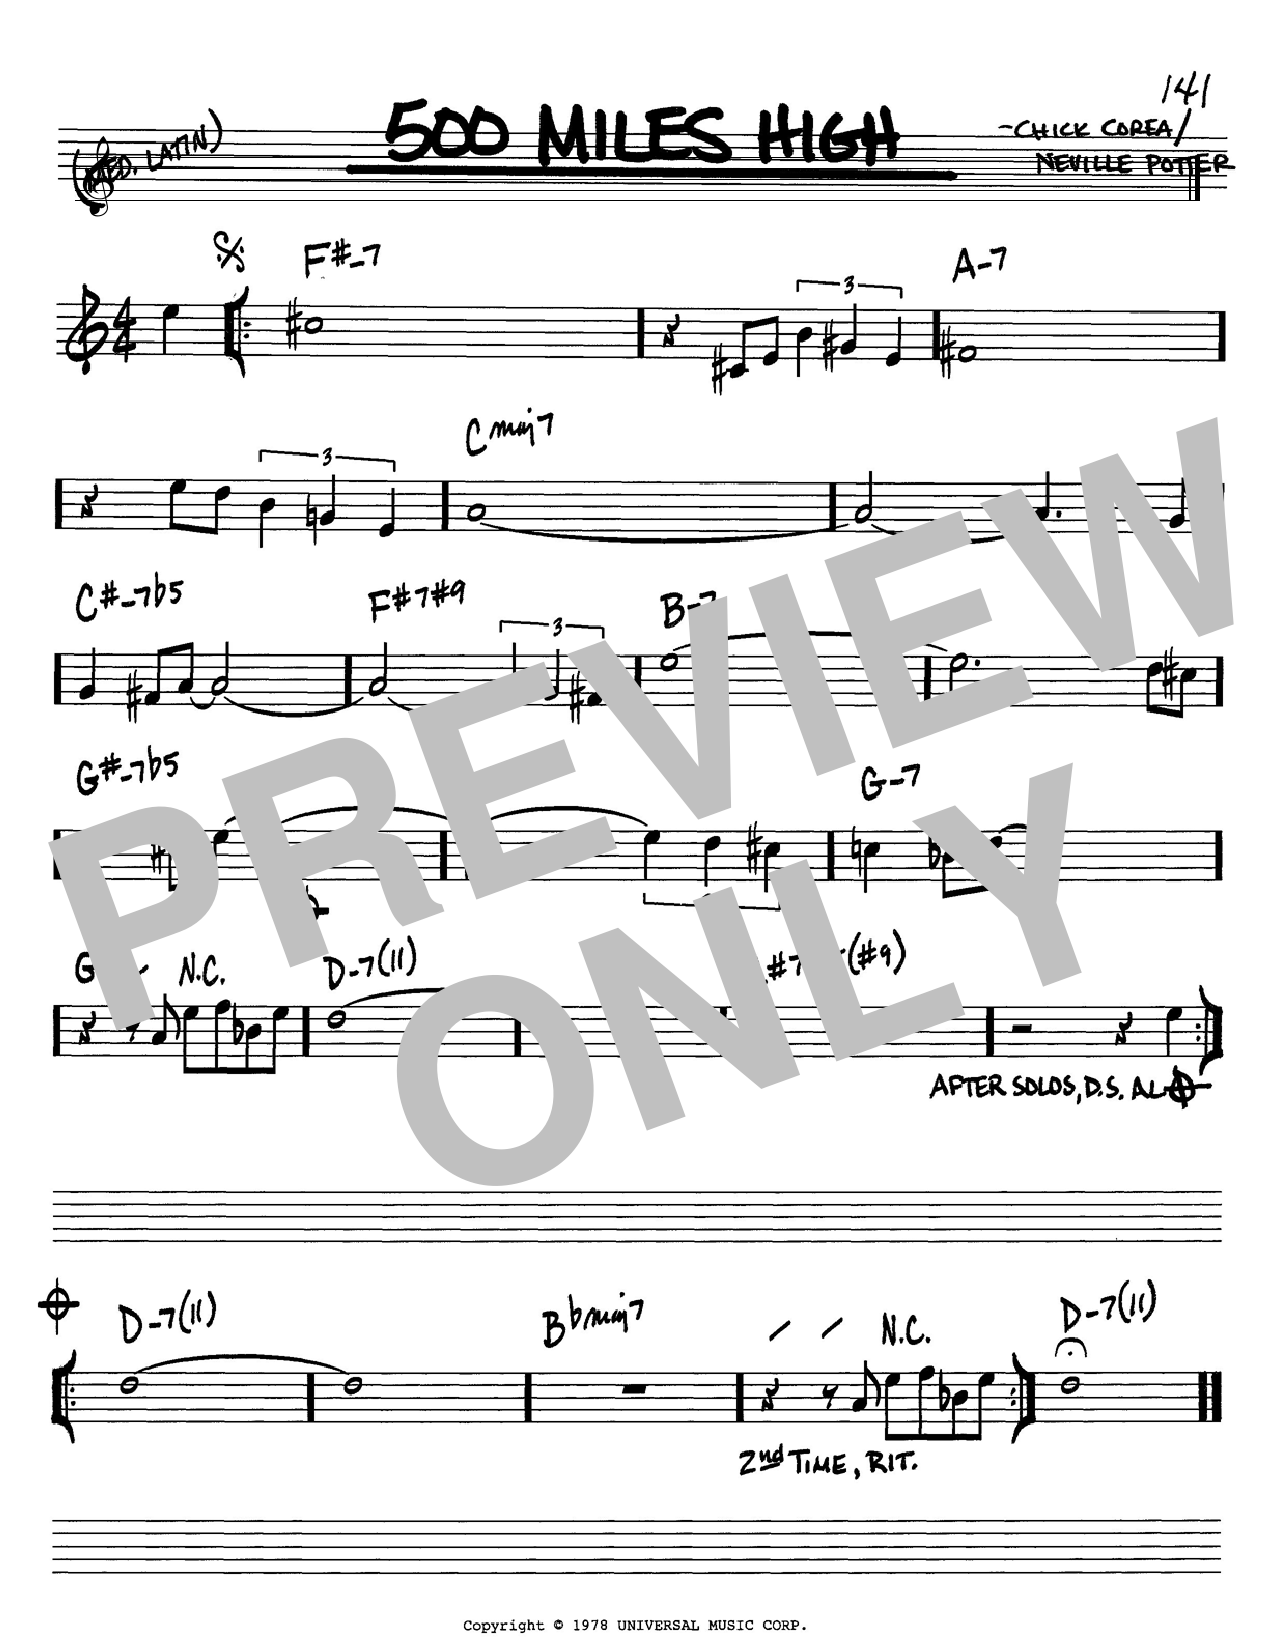 Chick Corea 500 Miles High Sheet Music Pdf Notes Chords Jazz Score Real Book Melody Chords Download Printable Sku 61476 Print and download peter paul and mary five hundred miles easy guitar tab. chick corea 500 miles high sheet music notes chords download printable real book melody chords pdf score sku 61476